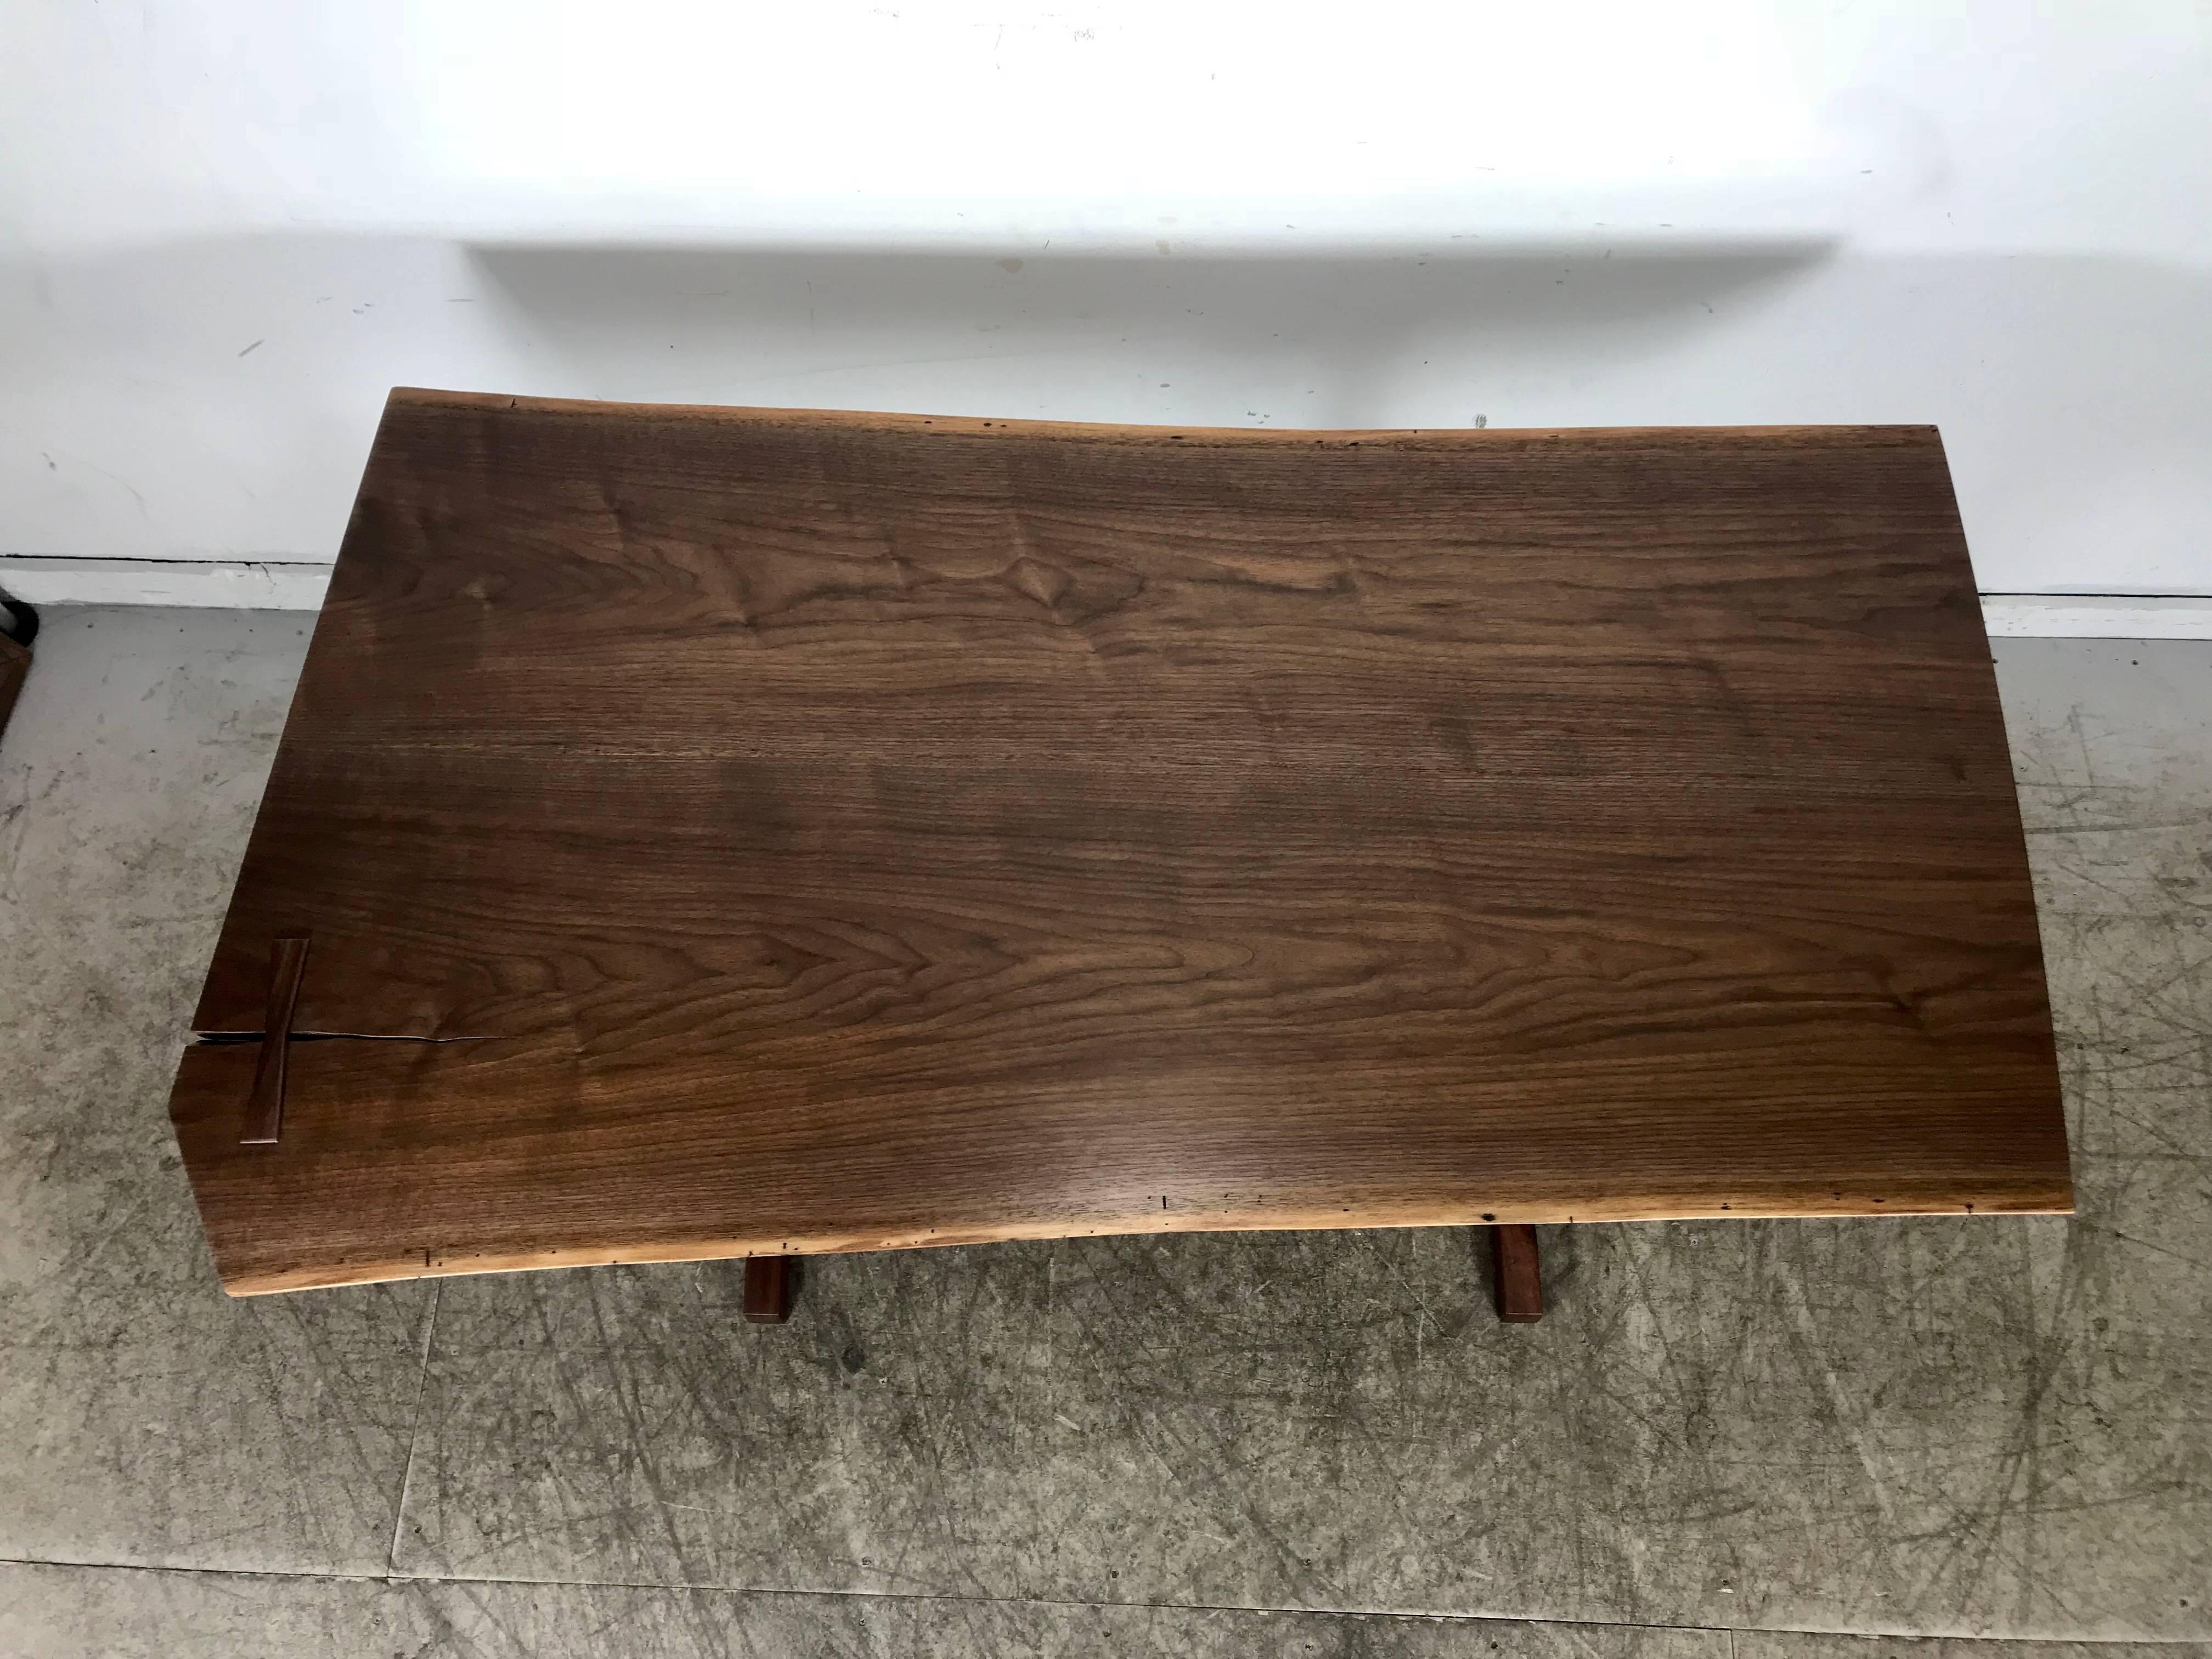 Hand-Crafted Griff Logan Workshop Studio Bench Made Free Edge Table or Desk